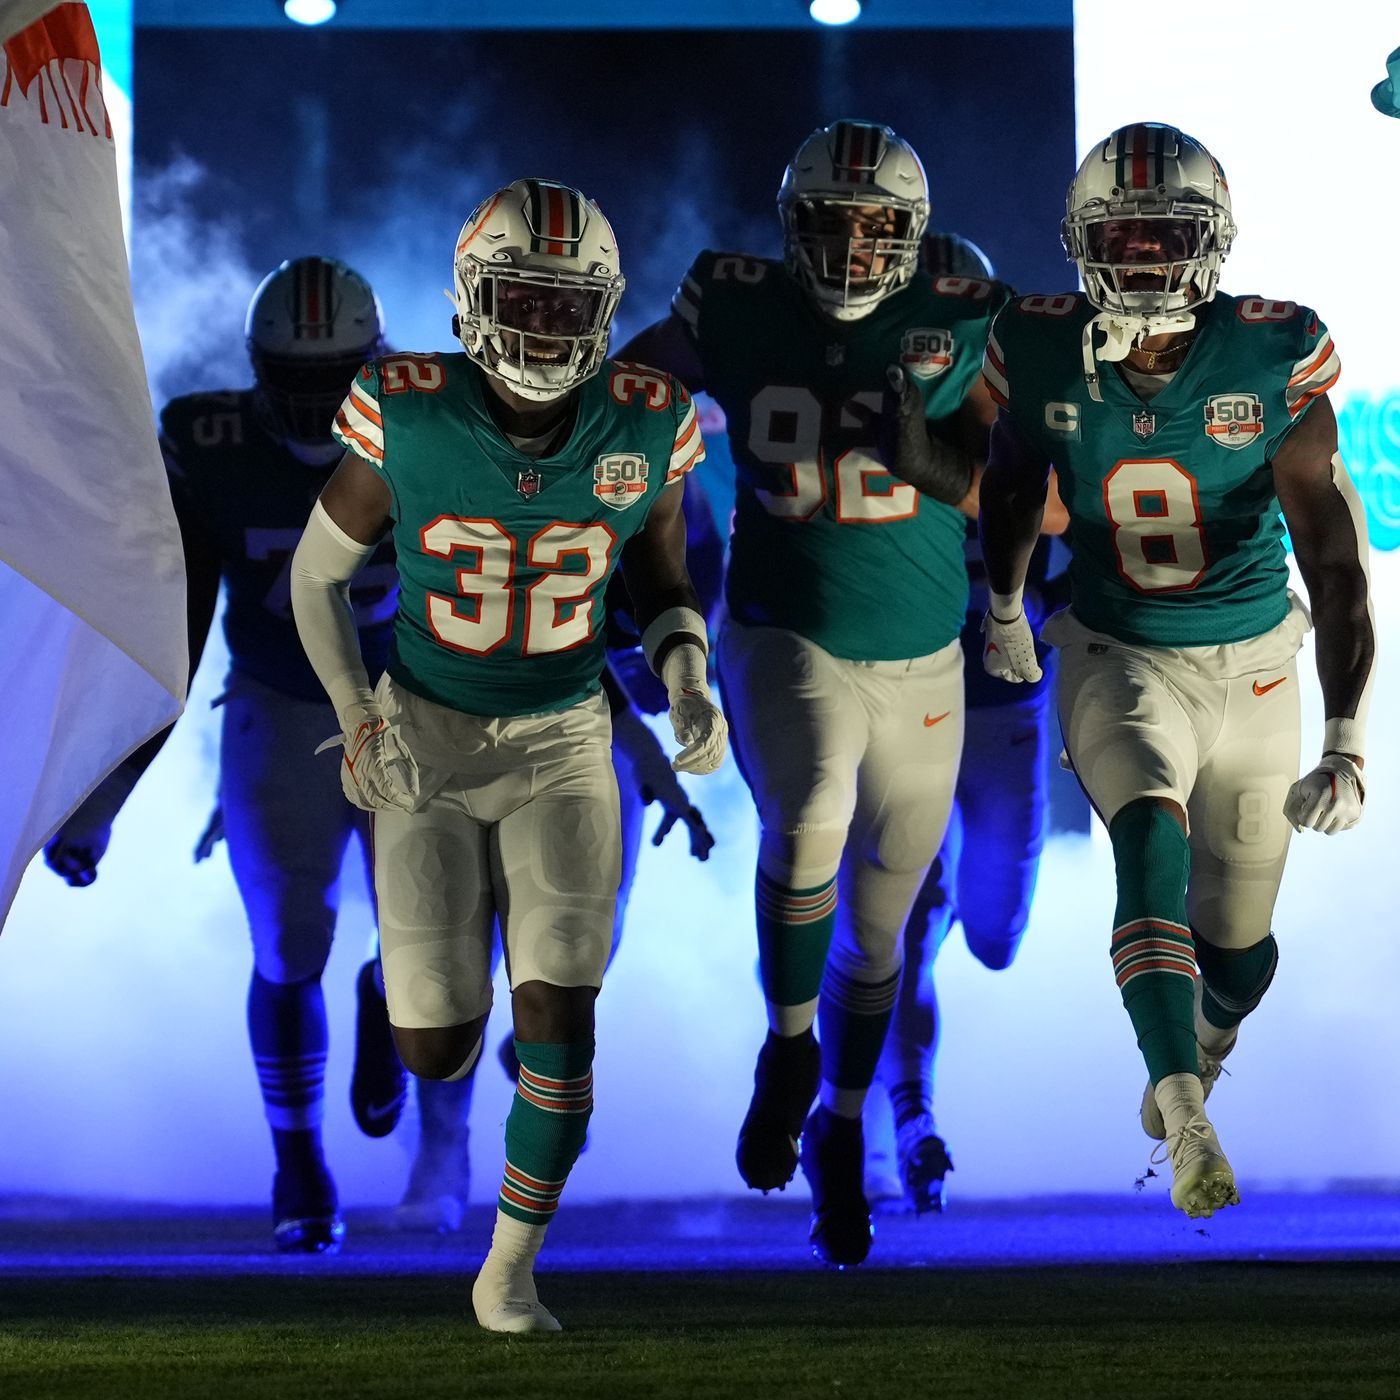 Enough with the Miami Dolphins throwbacks, change the uniforms for good